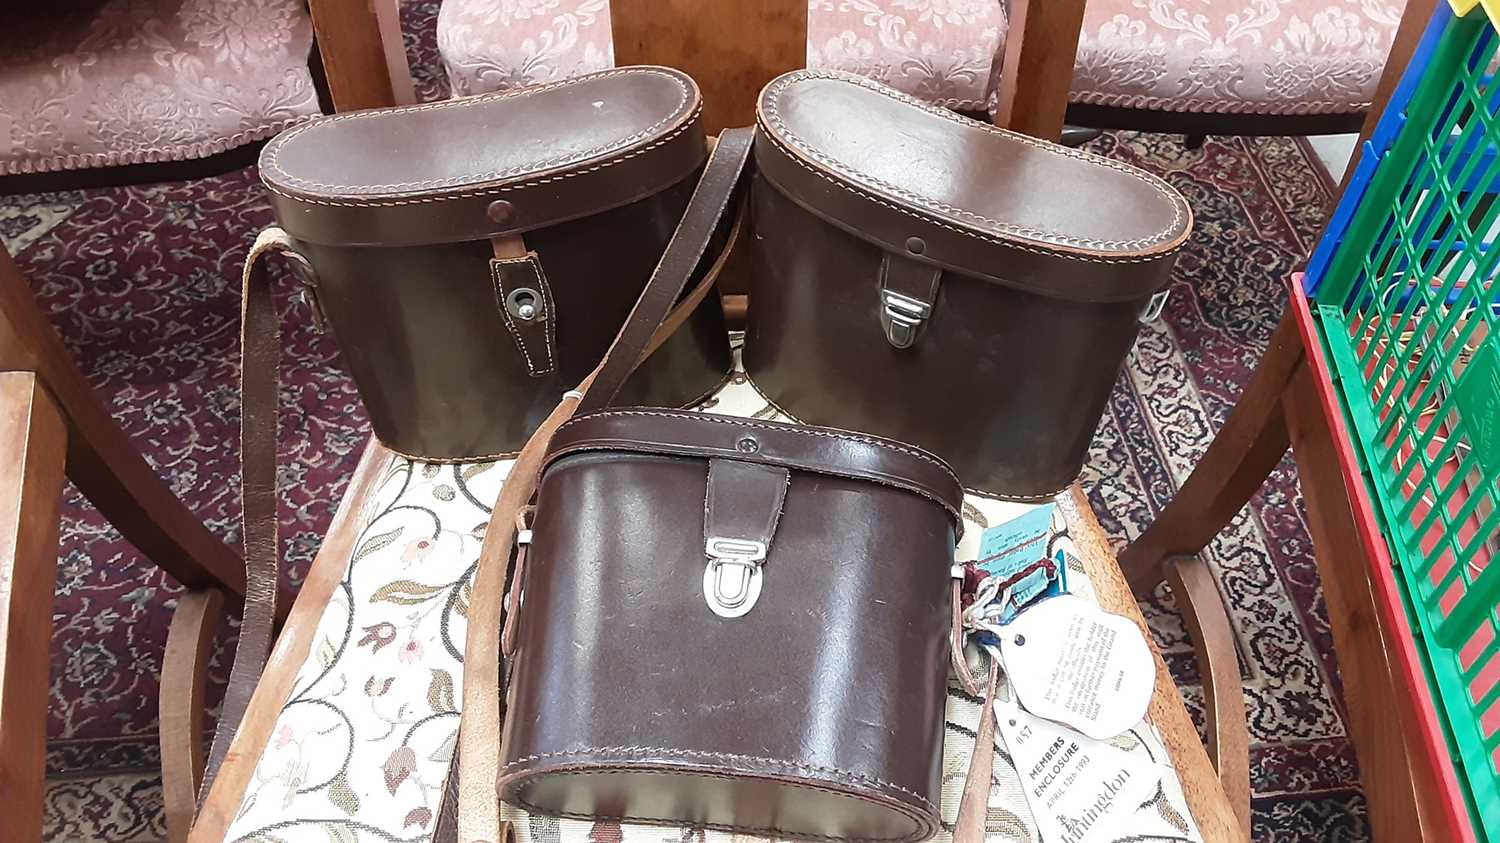 Three pairs of Ross binoculars in leather cases